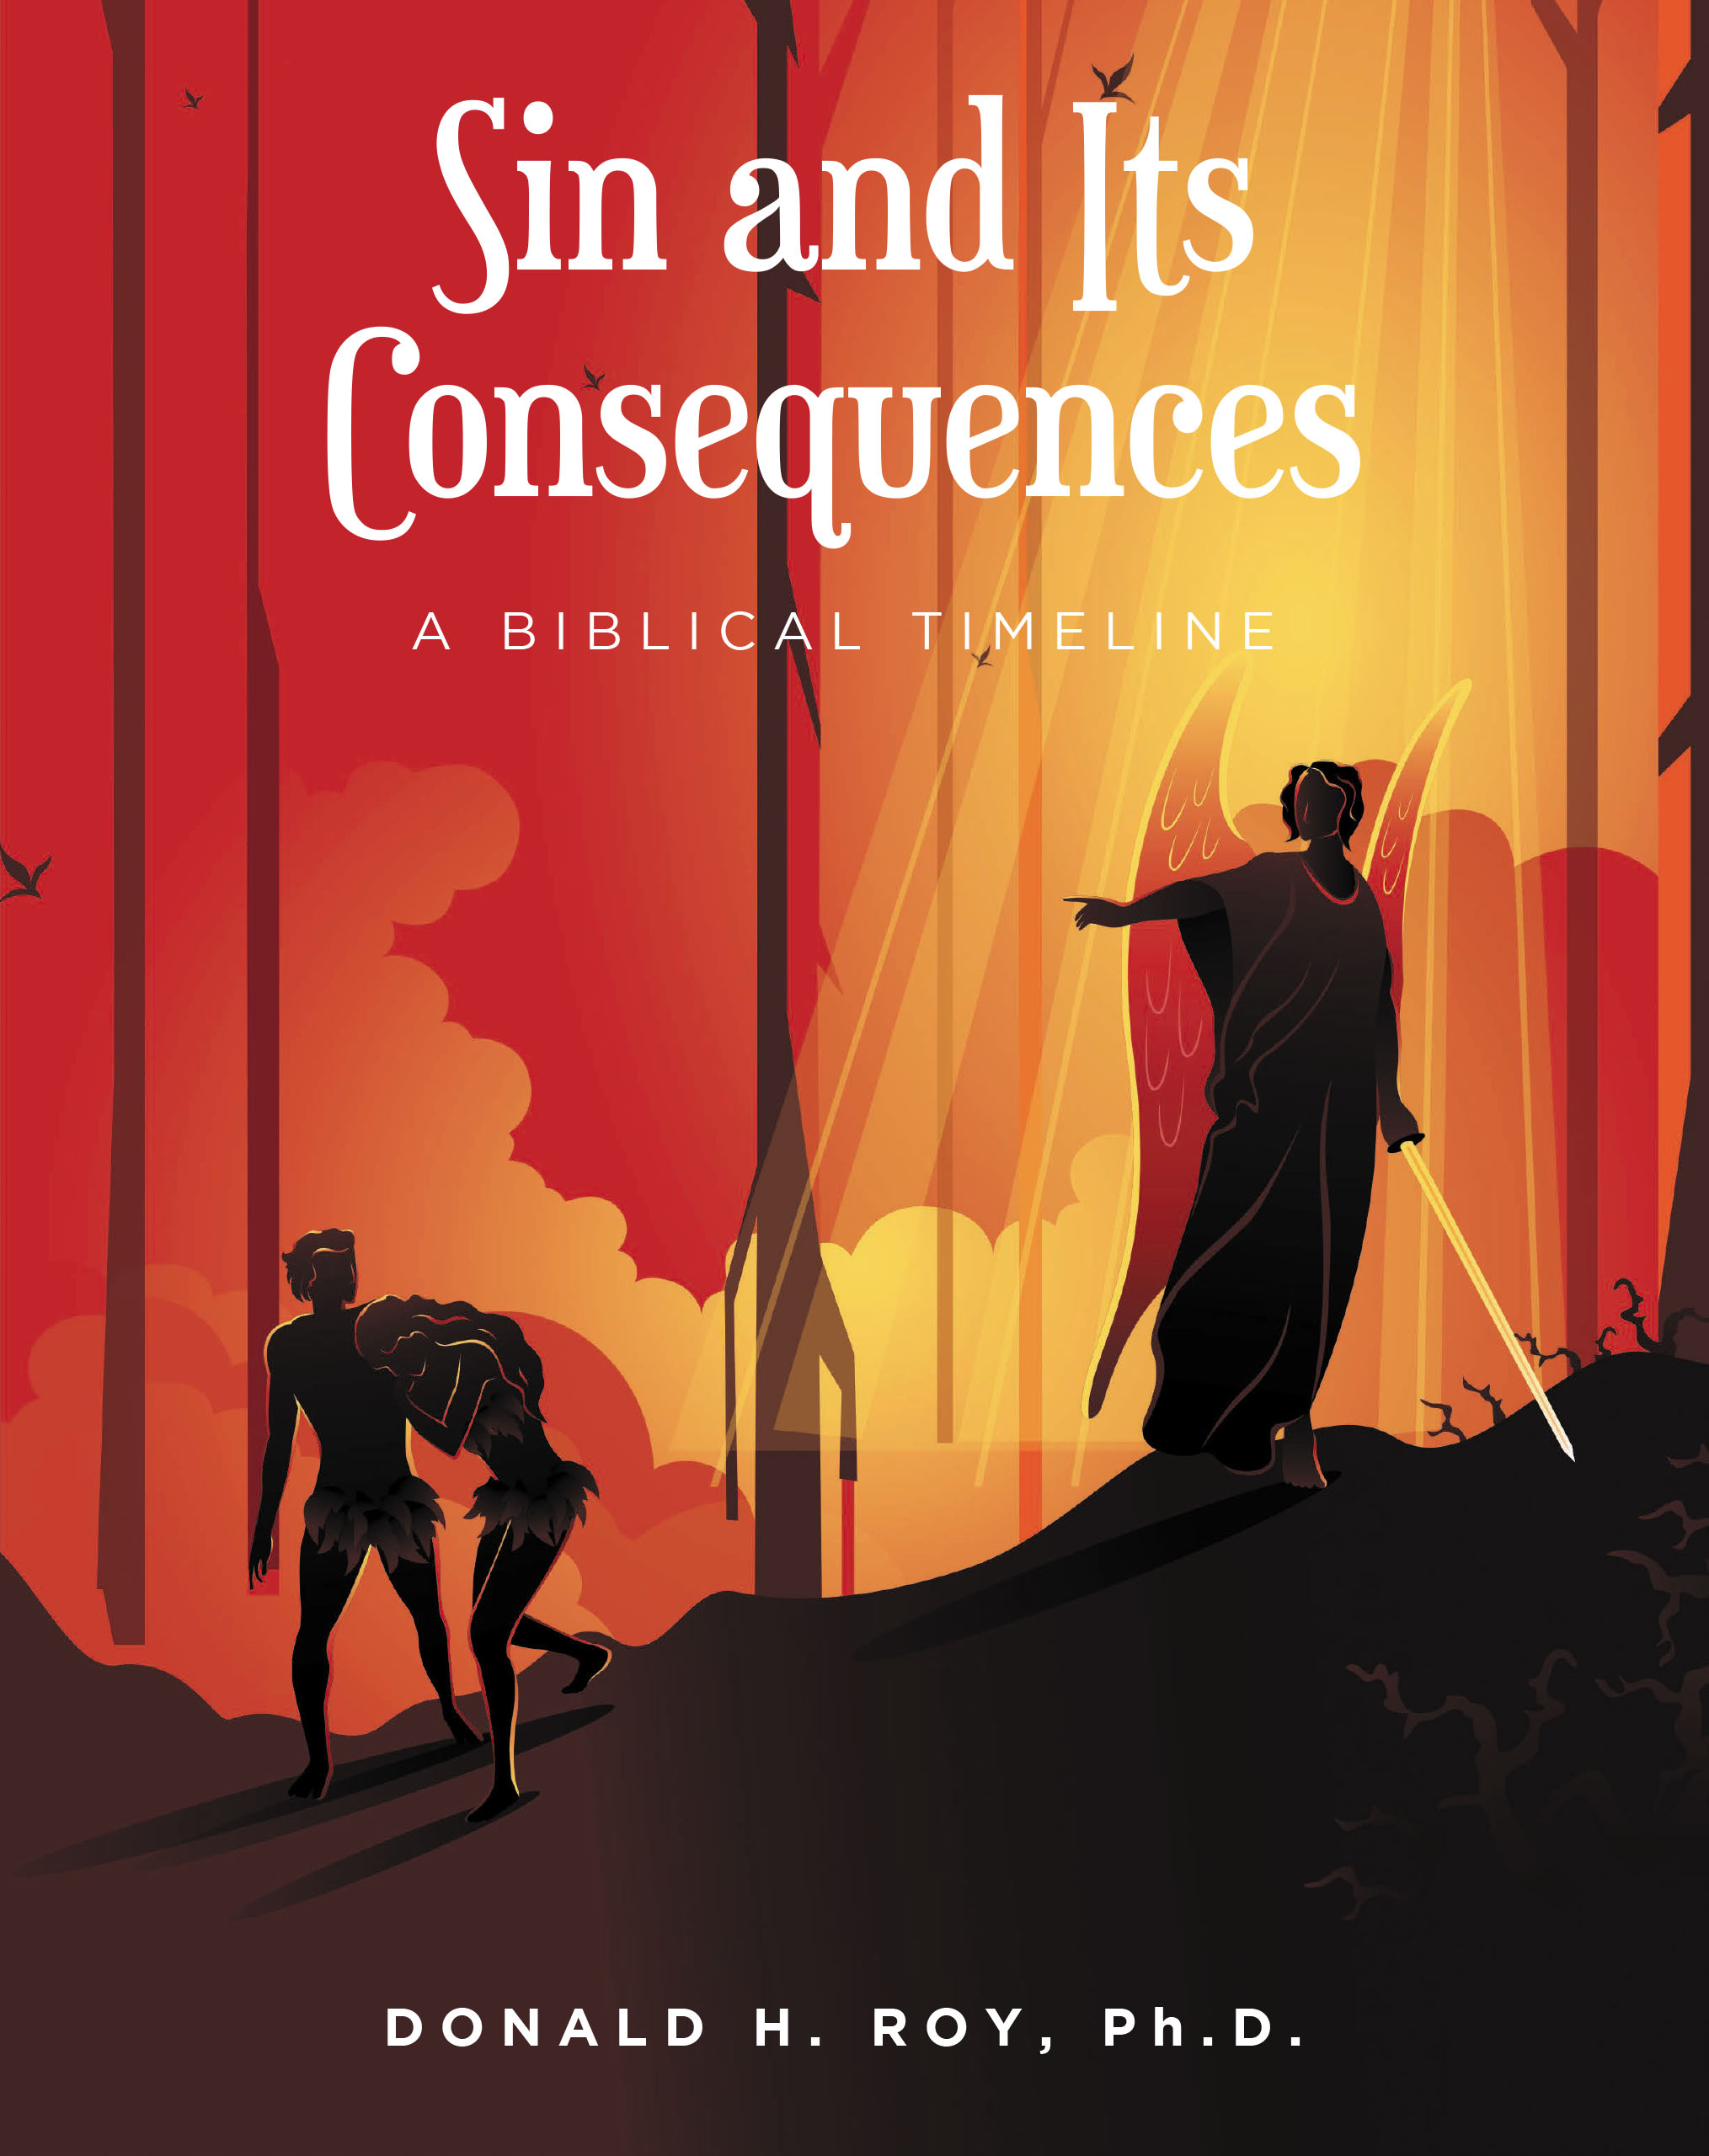 Donald H. Roy, Ph.D.’s New Book, “Sin and Its Consequences: A Biblical Timeline,” Examines the Sins Committed by People Within the Bible & the Direct Fallout They Cause